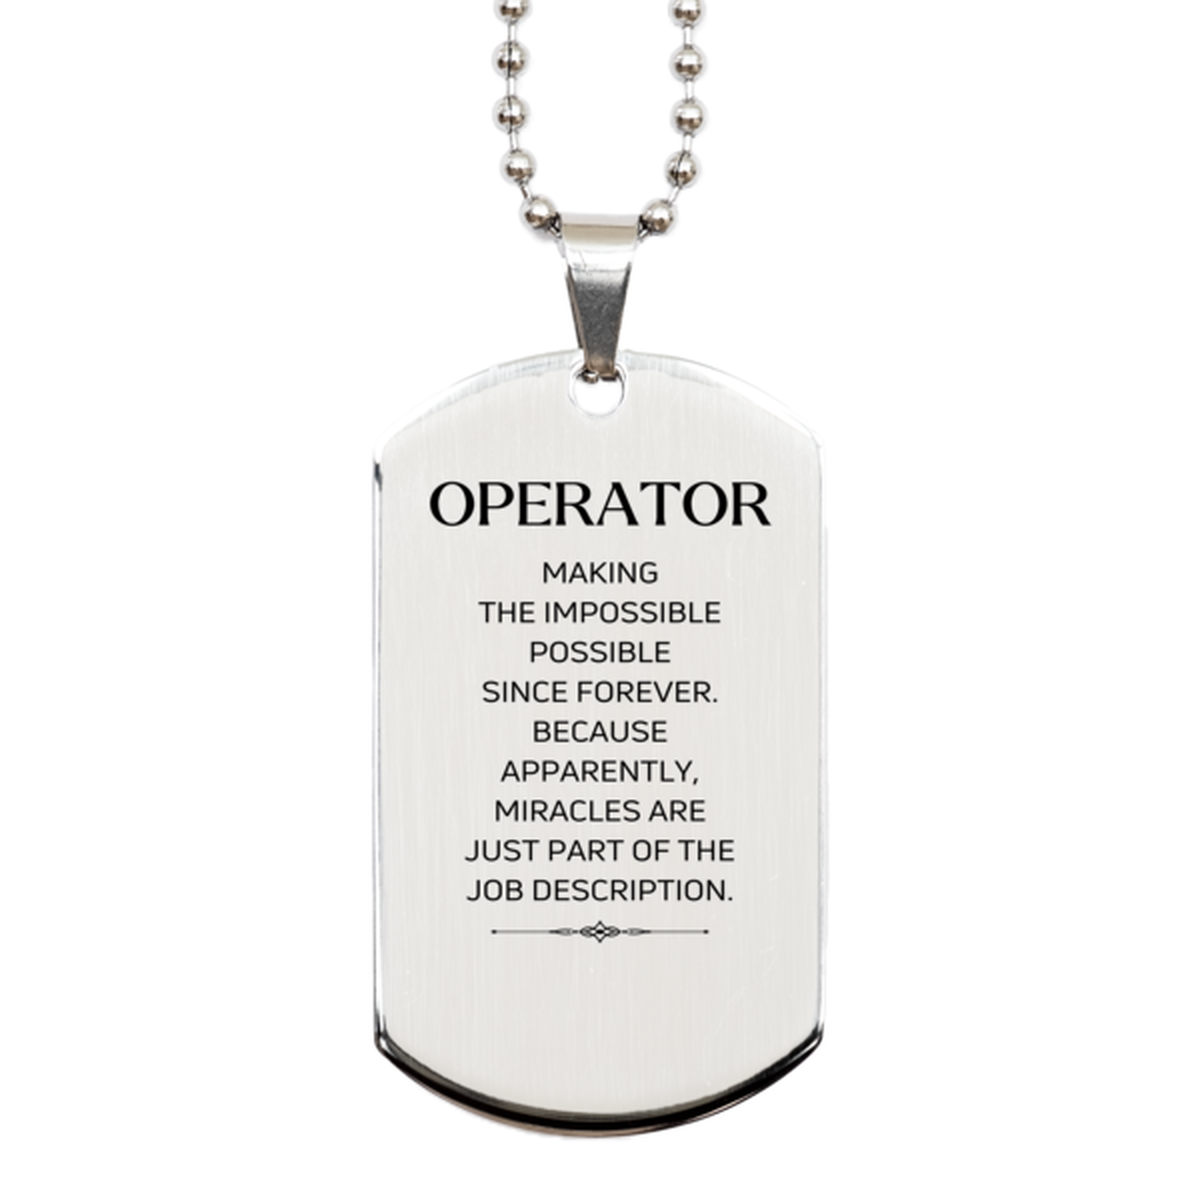 Funny Operator Gifts, Miracles are just part of the job description, Inspirational Birthday Silver Dog Tag For Operator, Men, Women, Coworkers, Friends, Boss